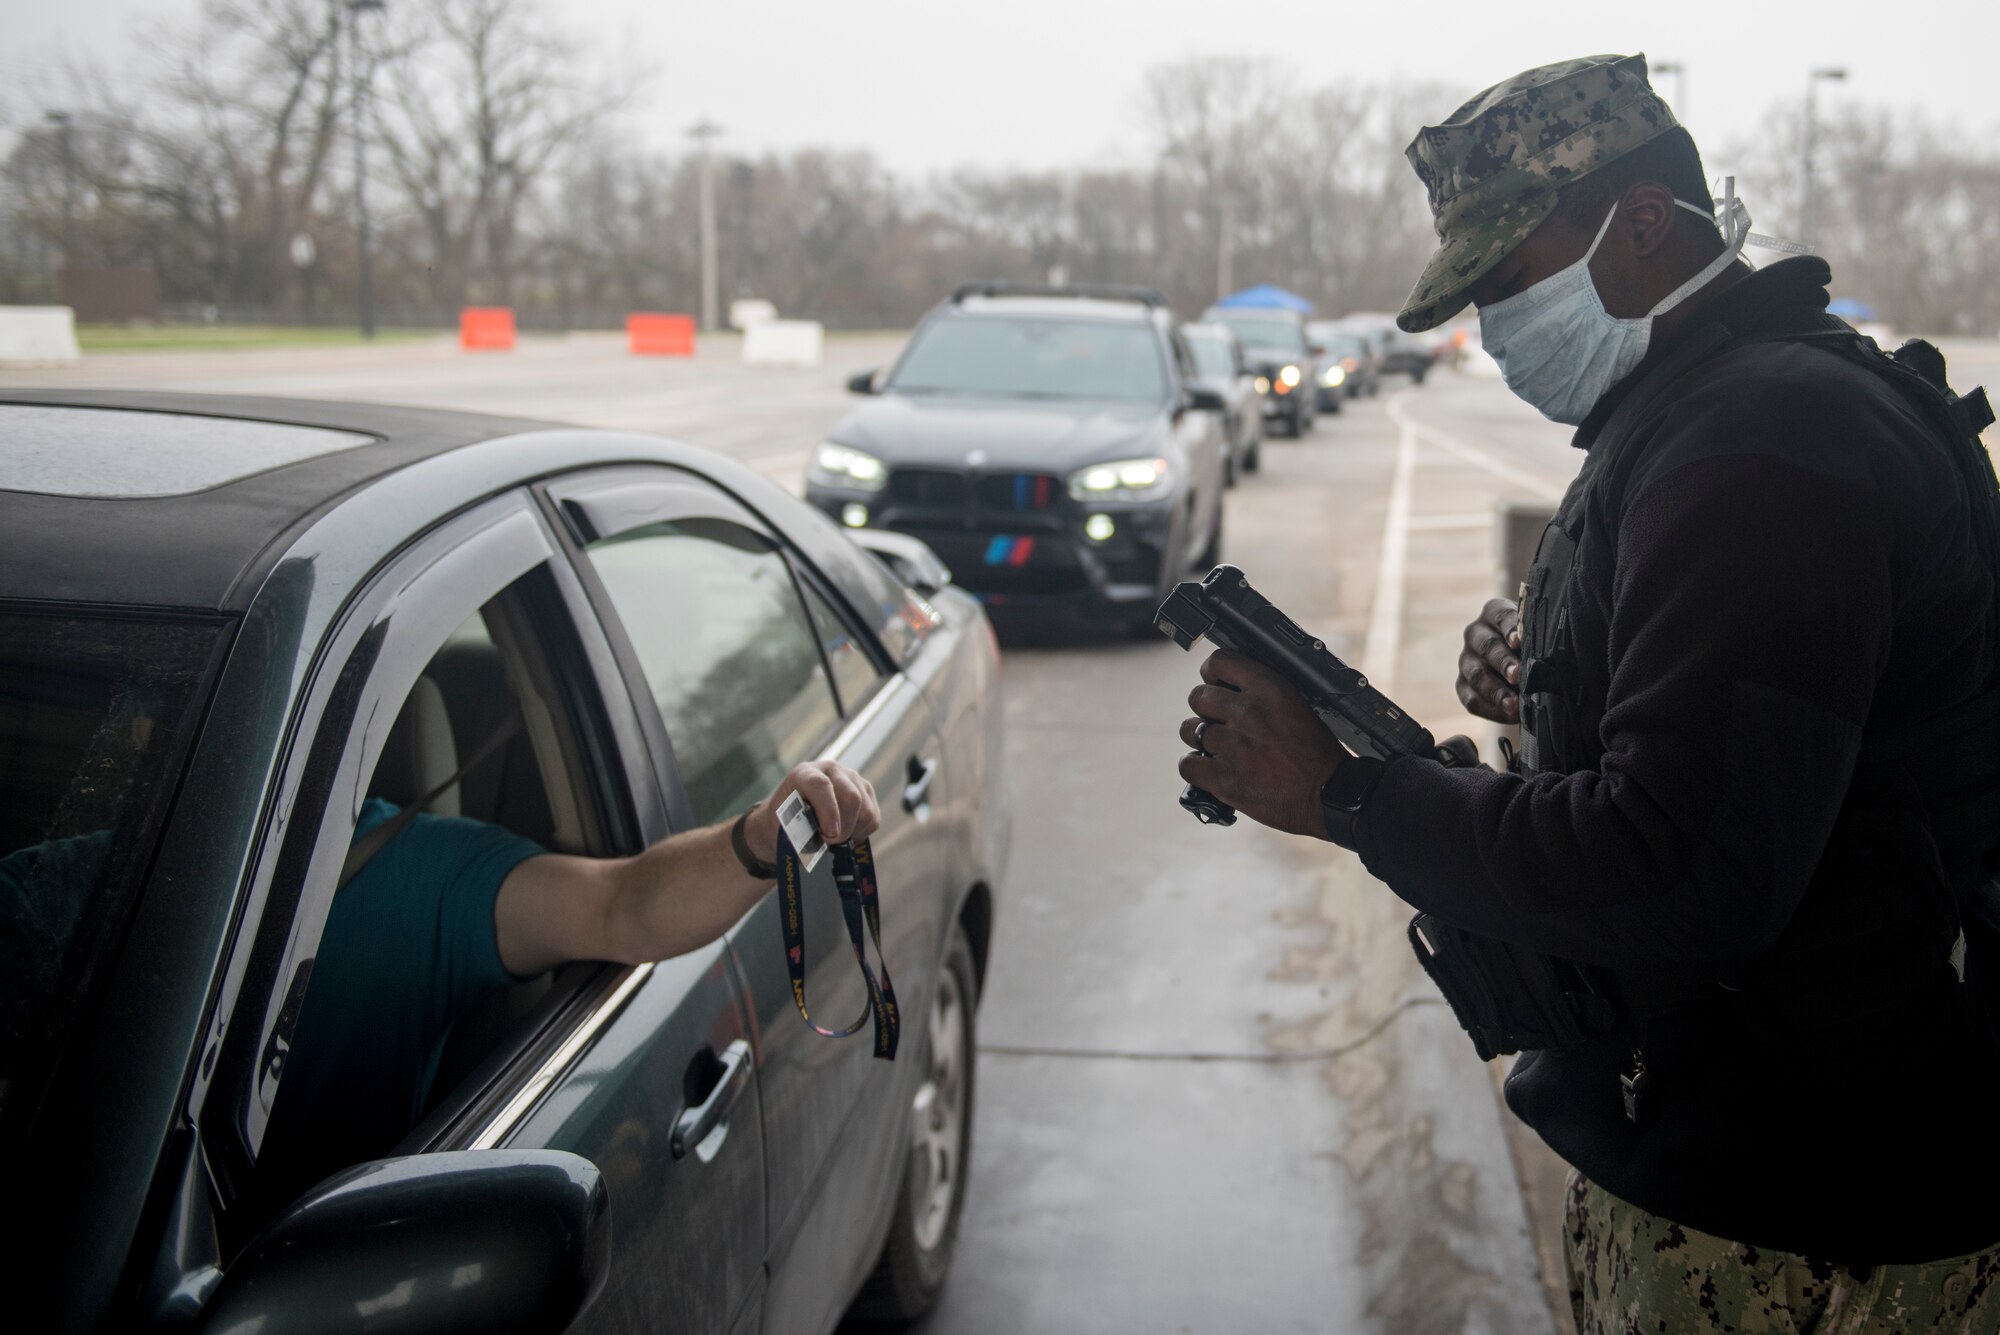 A service member wearing a cloth mask scans an ID card at an entry control point while a line of traffic waits to enter the installation.